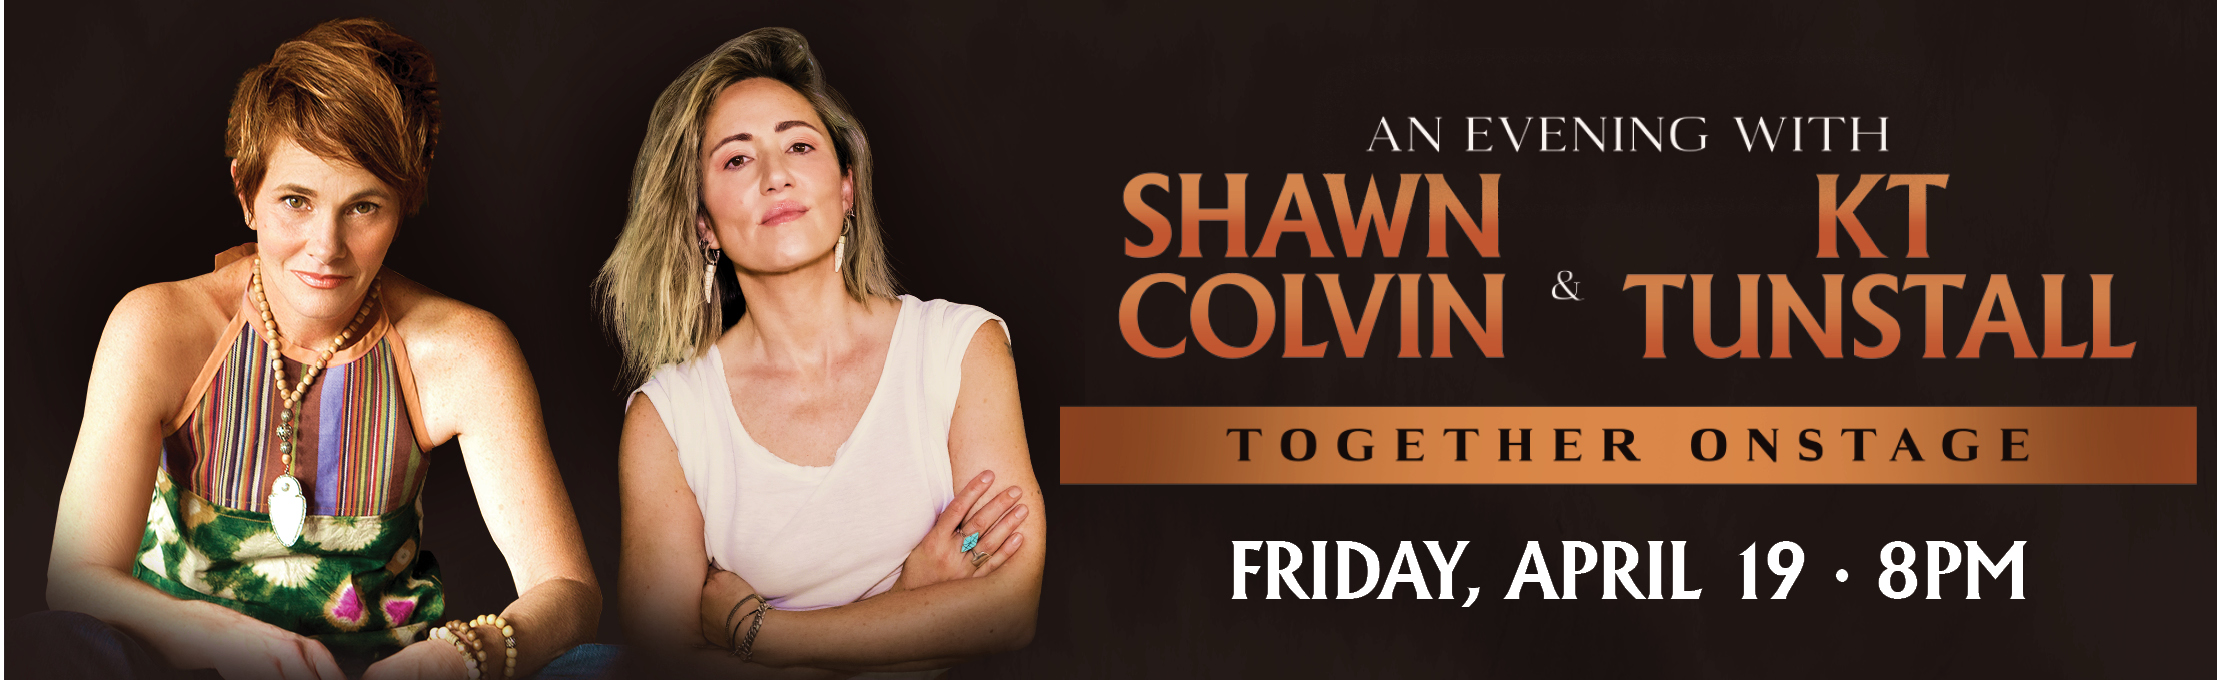 An Evening with Shawn Colvin & KT Tunstall